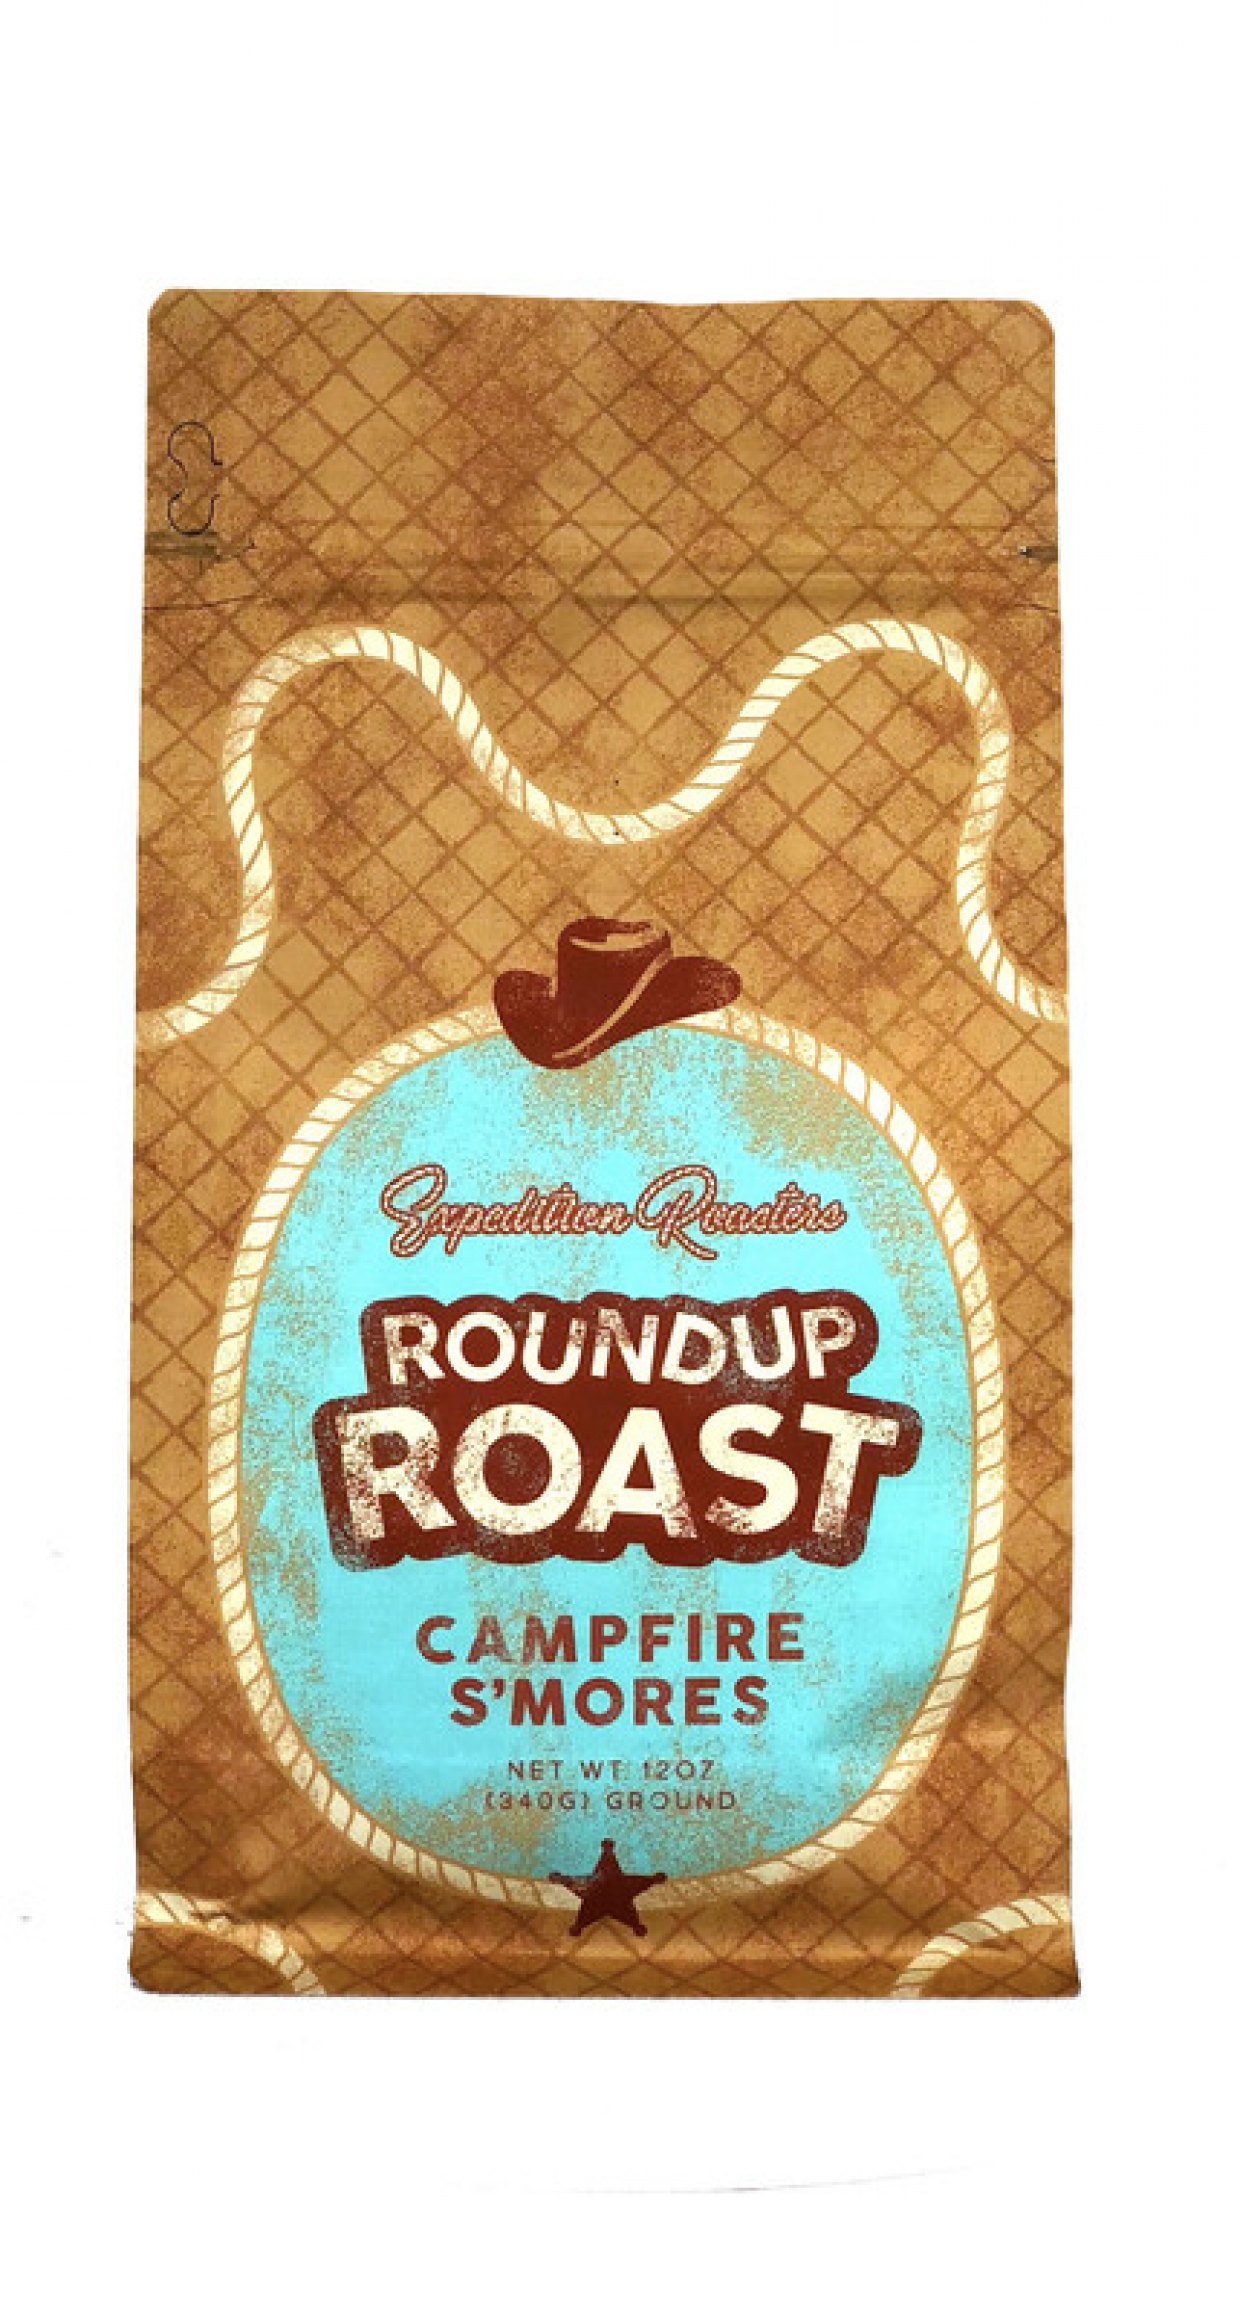 Roundup Roast - Campfire S'mores